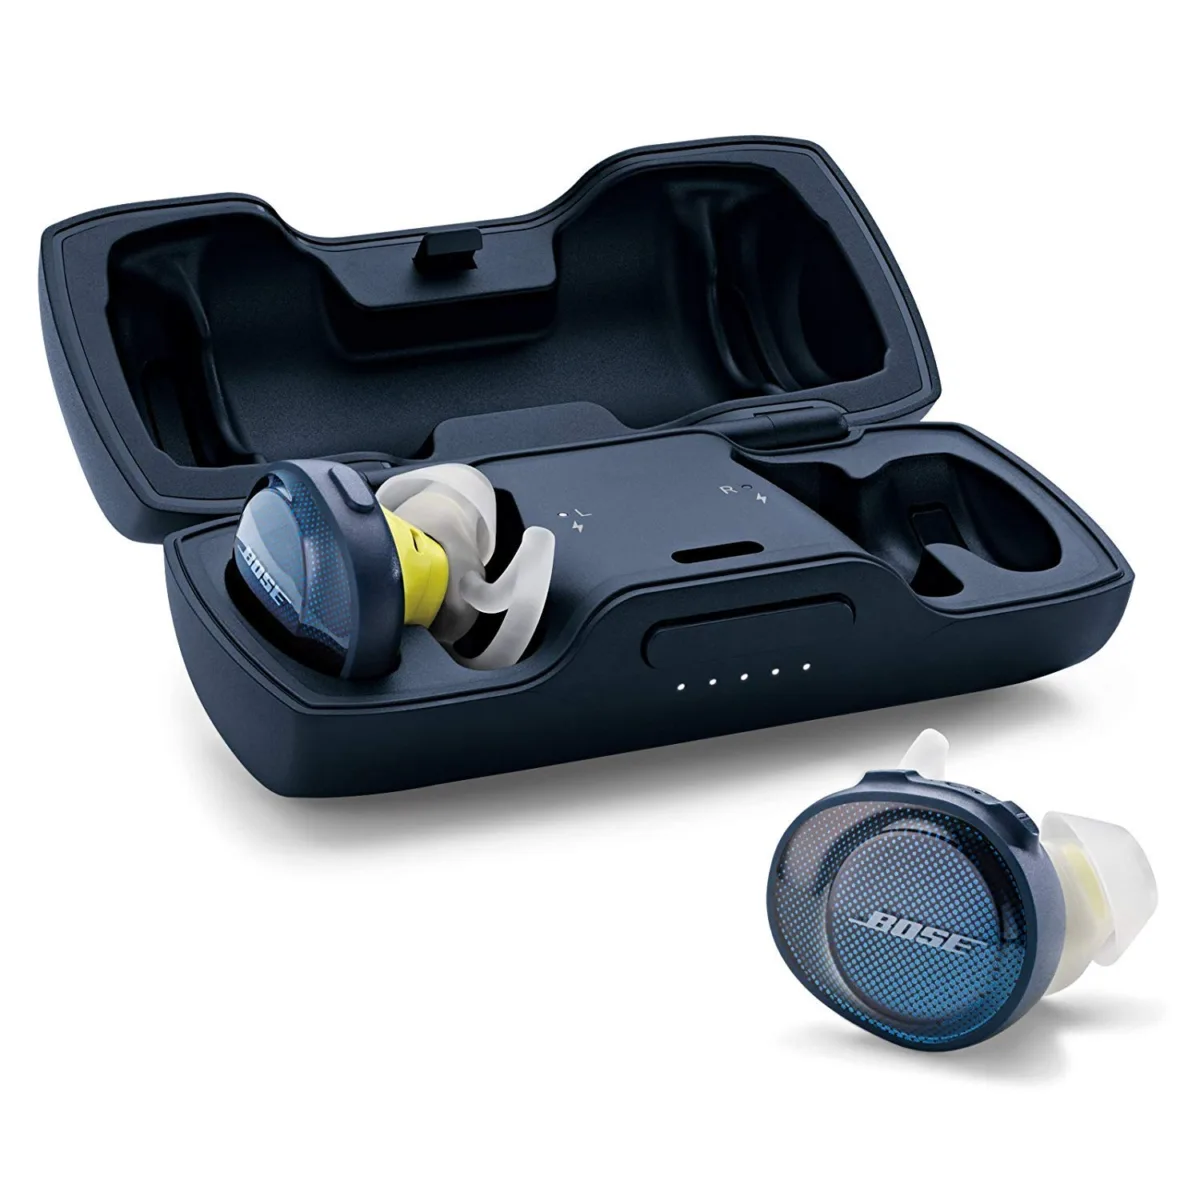 How to Maintain Battery Performance in Bose SoundSports Earbuds? 1